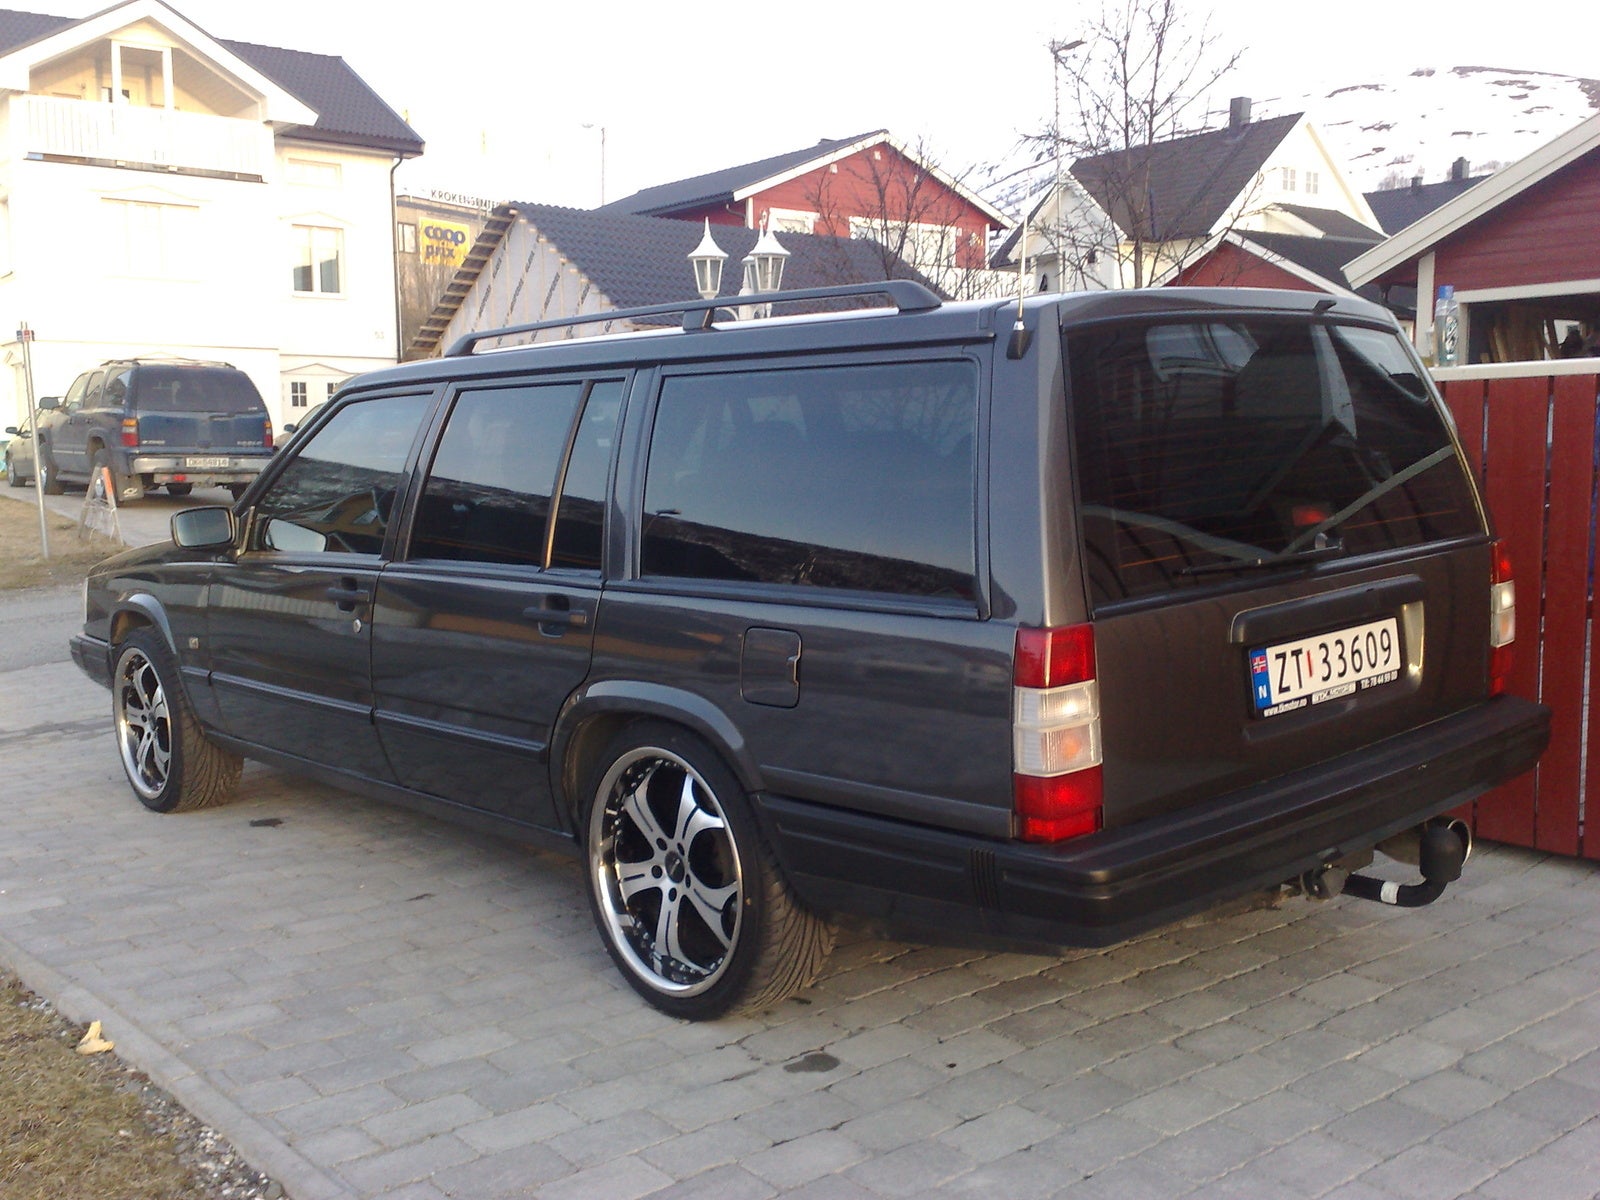 1995 Volvo 940 4 Dr Turbo Wagon - Pictures - 1995 Volvo 940 4 Dr Turbo ...